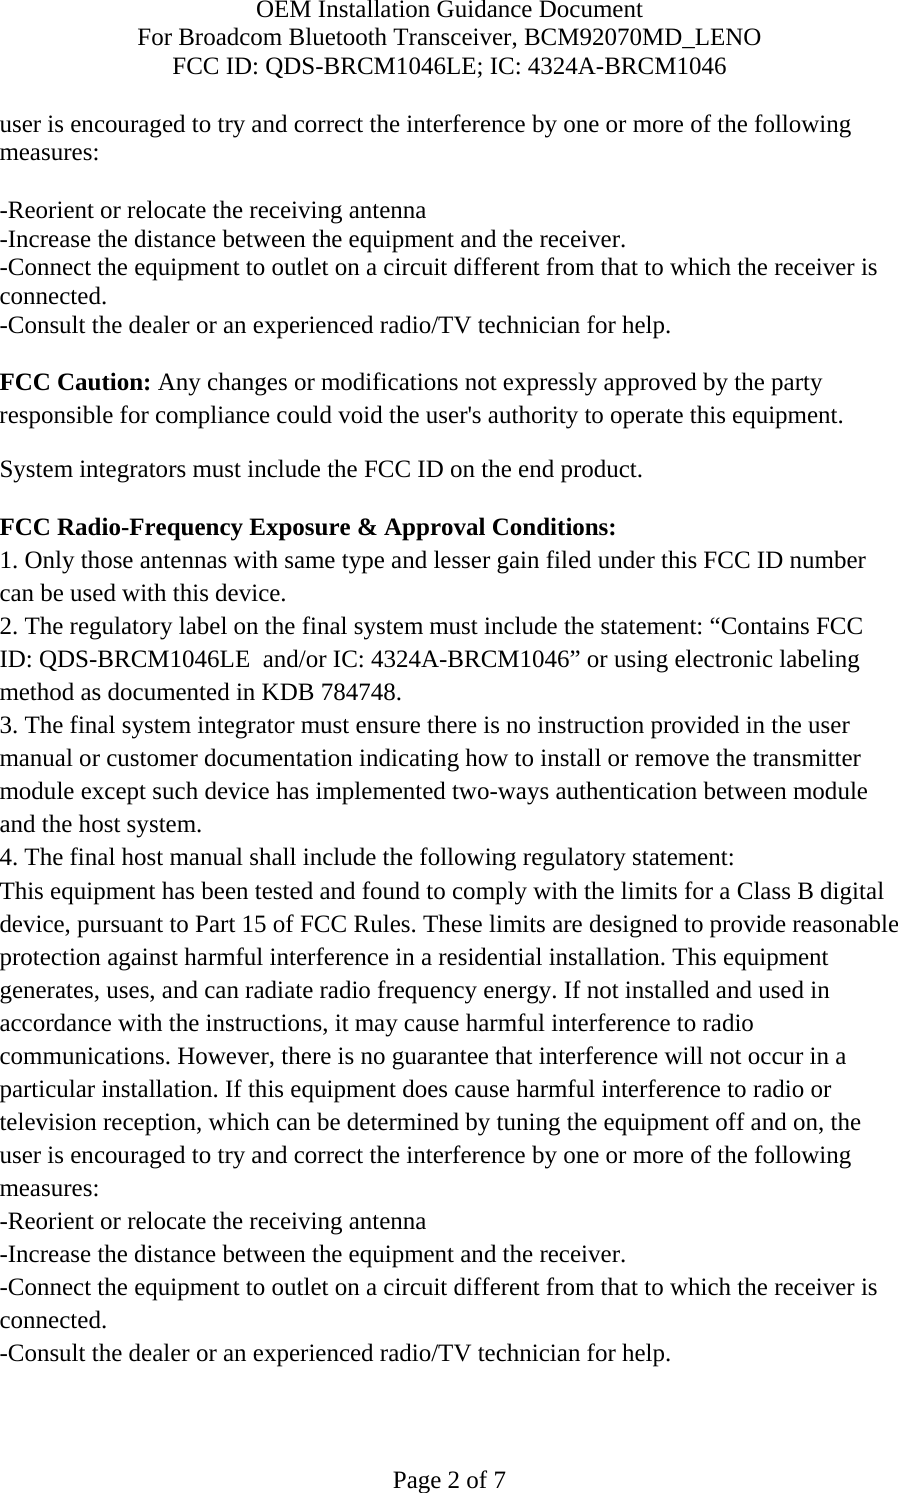 OEM Installation Guidance Document For Broadcom Bluetooth Transceiver, BCM92070MD_LENO FCC ID: QDS-BRCM1046LE; IC: 4324A-BRCM1046  Page 2 of 7 user is encouraged to try and correct the interference by one or more of the following measures:   -Reorient or relocate the receiving antenna -Increase the distance between the equipment and the receiver. -Connect the equipment to outlet on a circuit different from that to which the receiver is connected. -Consult the dealer or an experienced radio/TV technician for help.  FCC Caution: Any changes or modifications not expressly approved by the party responsible for compliance could void the user&apos;s authority to operate this equipment. System integrators must include the FCC ID on the end product.   FCC Radio-Frequency Exposure &amp; Approval Conditions: 1. Only those antennas with same type and lesser gain filed under this FCC ID number can be used with this device. 2. The regulatory label on the final system must include the statement: “Contains FCC ID: QDS-BRCM1046LE  and/or IC: 4324A-BRCM1046” or using electronic labeling method as documented in KDB 784748. 3. The final system integrator must ensure there is no instruction provided in the user manual or customer documentation indicating how to install or remove the transmitter module except such device has implemented two-ways authentication between module and the host system. 4. The final host manual shall include the following regulatory statement: This equipment has been tested and found to comply with the limits for a Class B digital device, pursuant to Part 15 of FCC Rules. These limits are designed to provide reasonable protection against harmful interference in a residential installation. This equipment generates, uses, and can radiate radio frequency energy. If not installed and used in accordance with the instructions, it may cause harmful interference to radio communications. However, there is no guarantee that interference will not occur in a particular installation. If this equipment does cause harmful interference to radio or television reception, which can be determined by tuning the equipment off and on, the user is encouraged to try and correct the interference by one or more of the following measures: -Reorient or relocate the receiving antenna -Increase the distance between the equipment and the receiver. -Connect the equipment to outlet on a circuit different from that to which the receiver is connected. -Consult the dealer or an experienced radio/TV technician for help.  